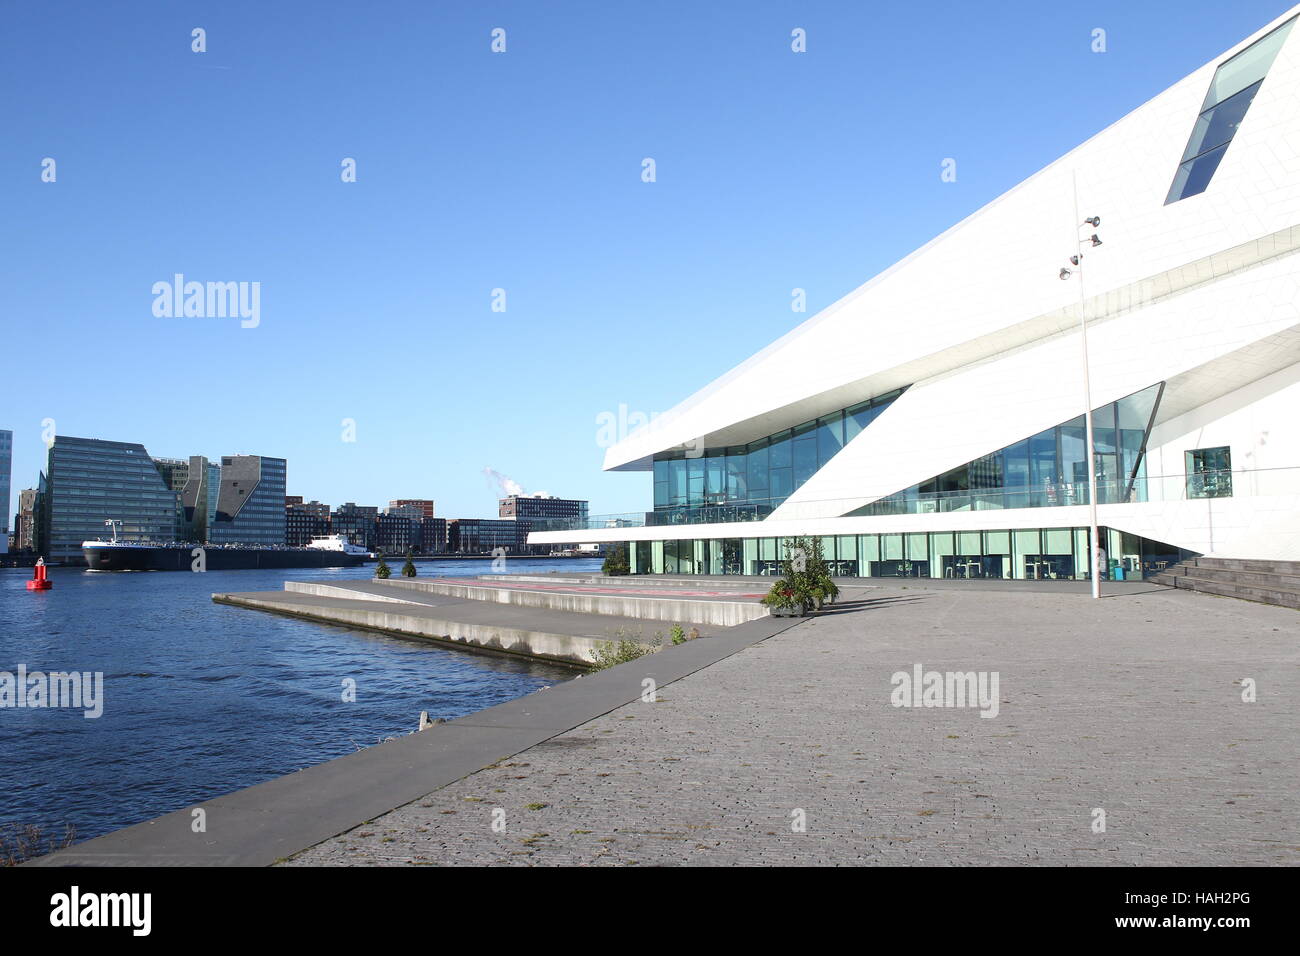 EYE Film Institute Netherlands, Amsterdam. Dutch Film archive and museum in Amsterdam-Noord overlooking IJ River. Stock Photo